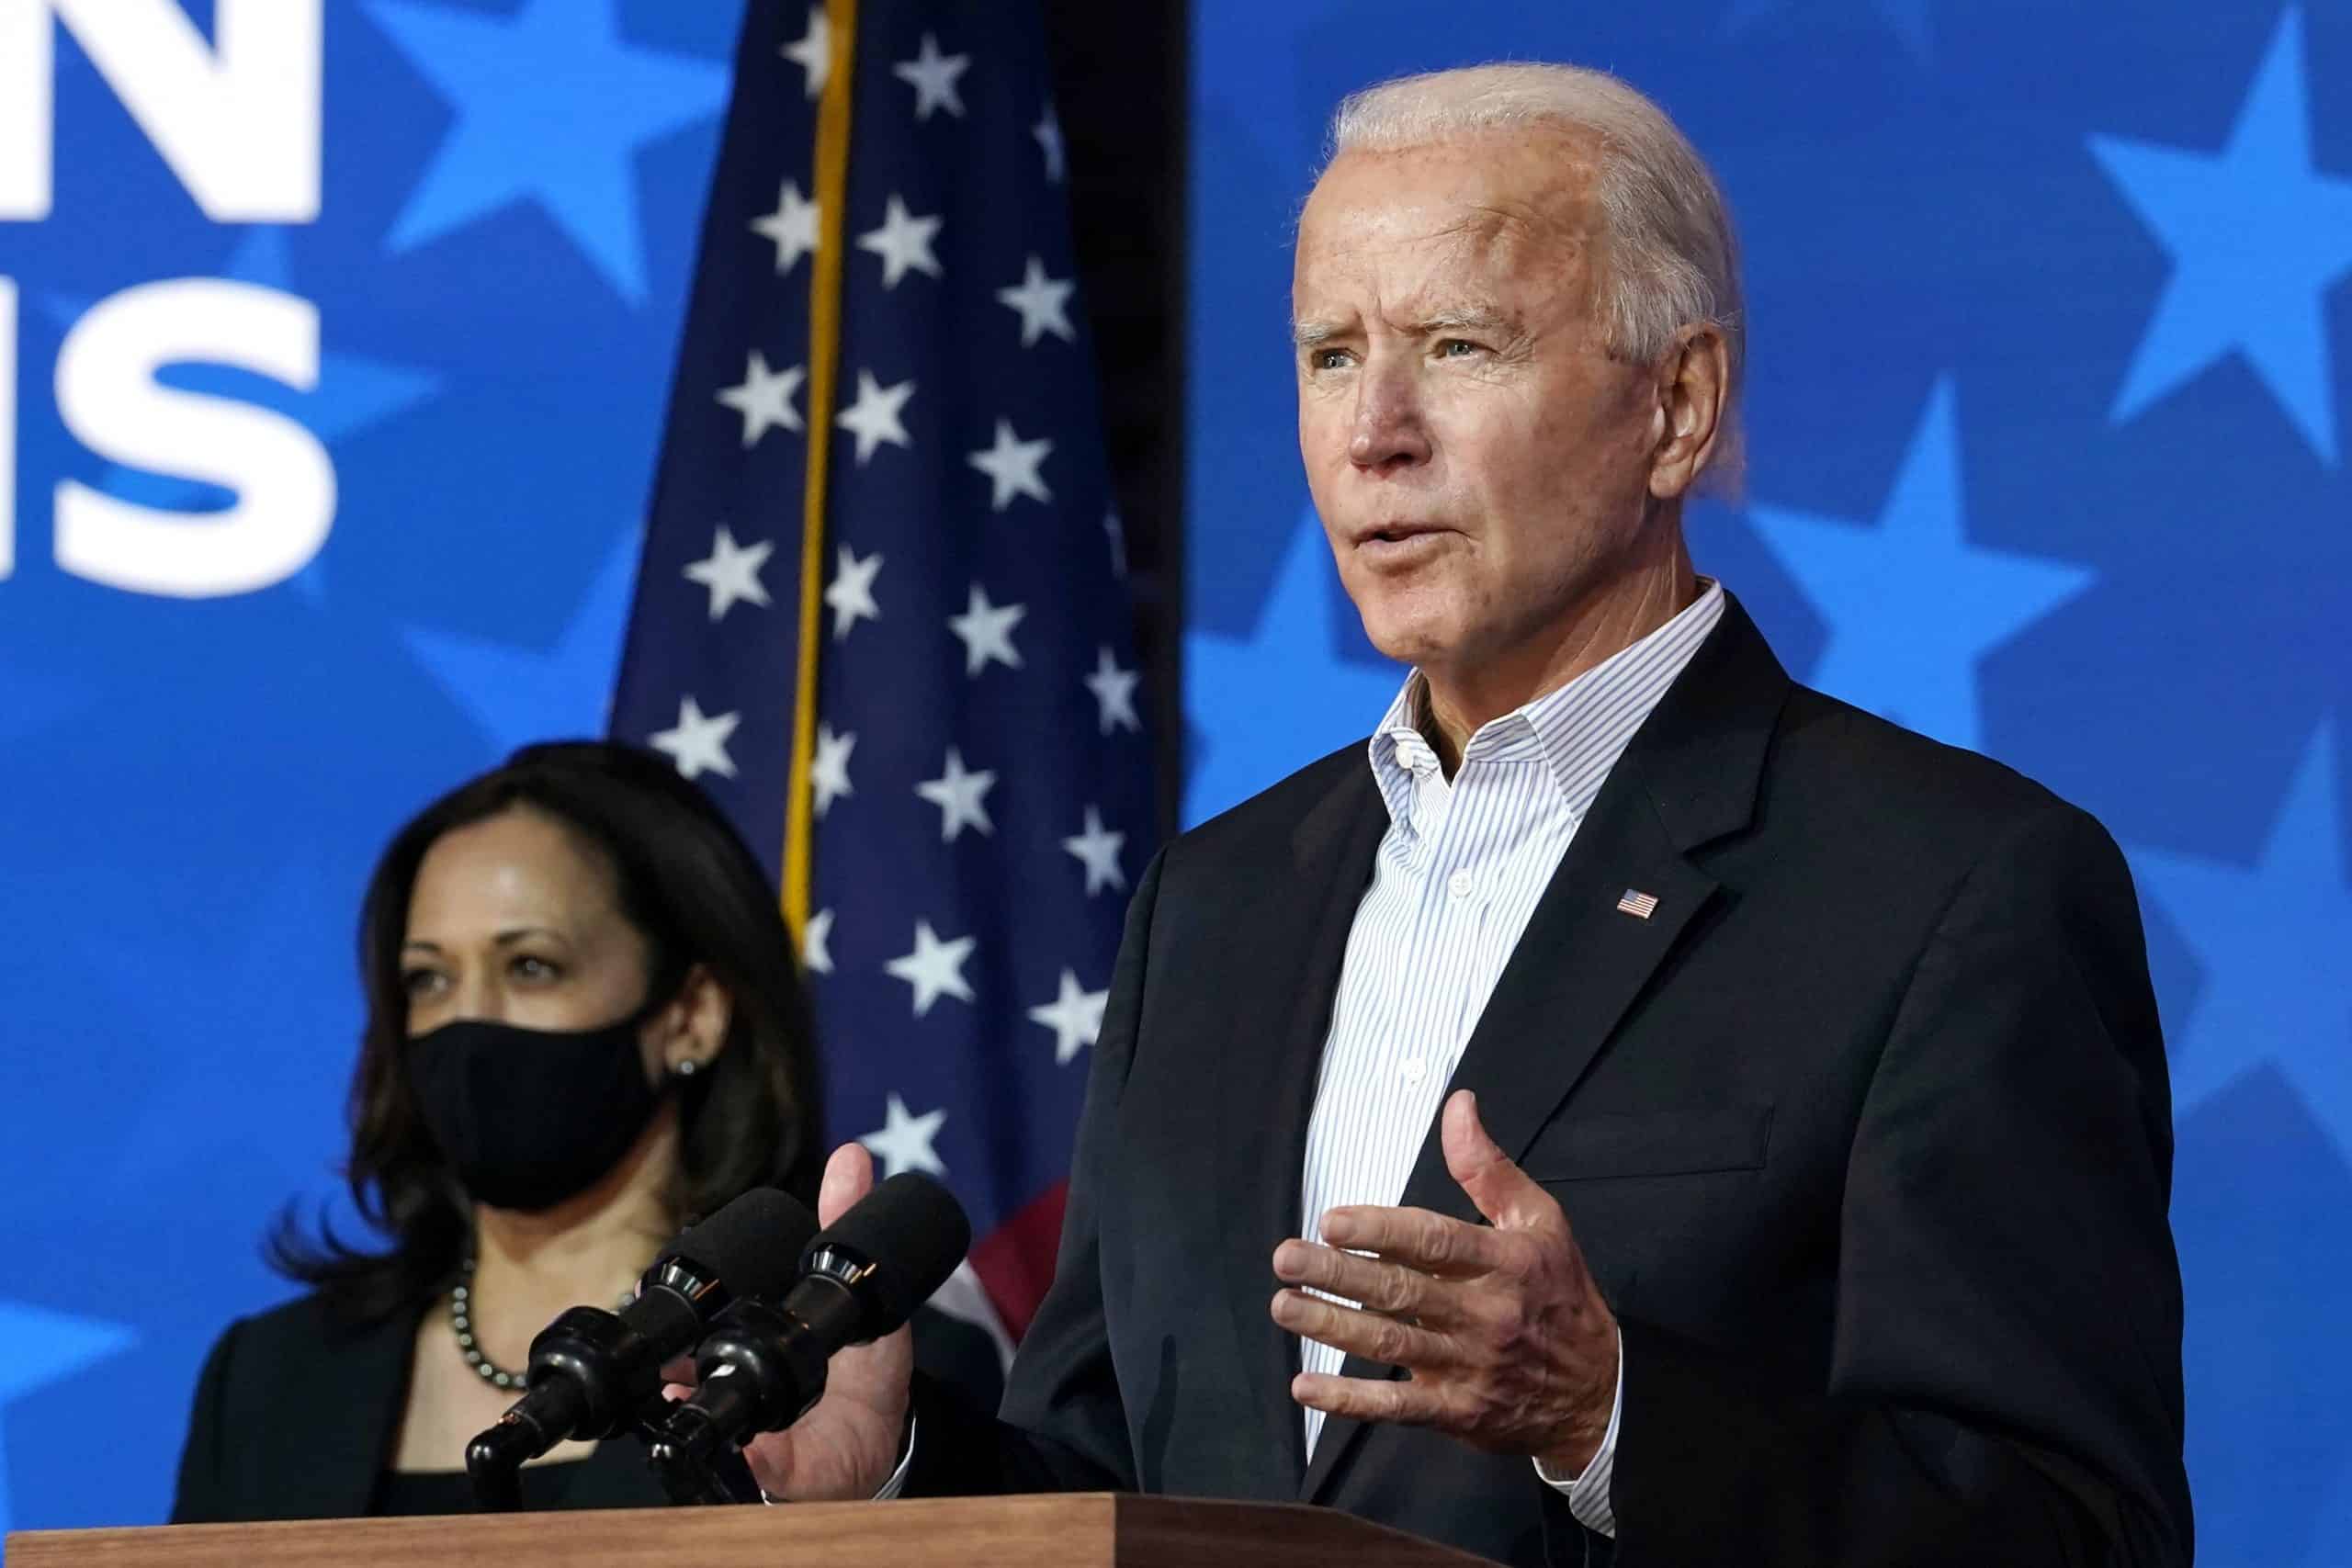 Biden pulls ahead in Pennsylvania, in touching distance of victory